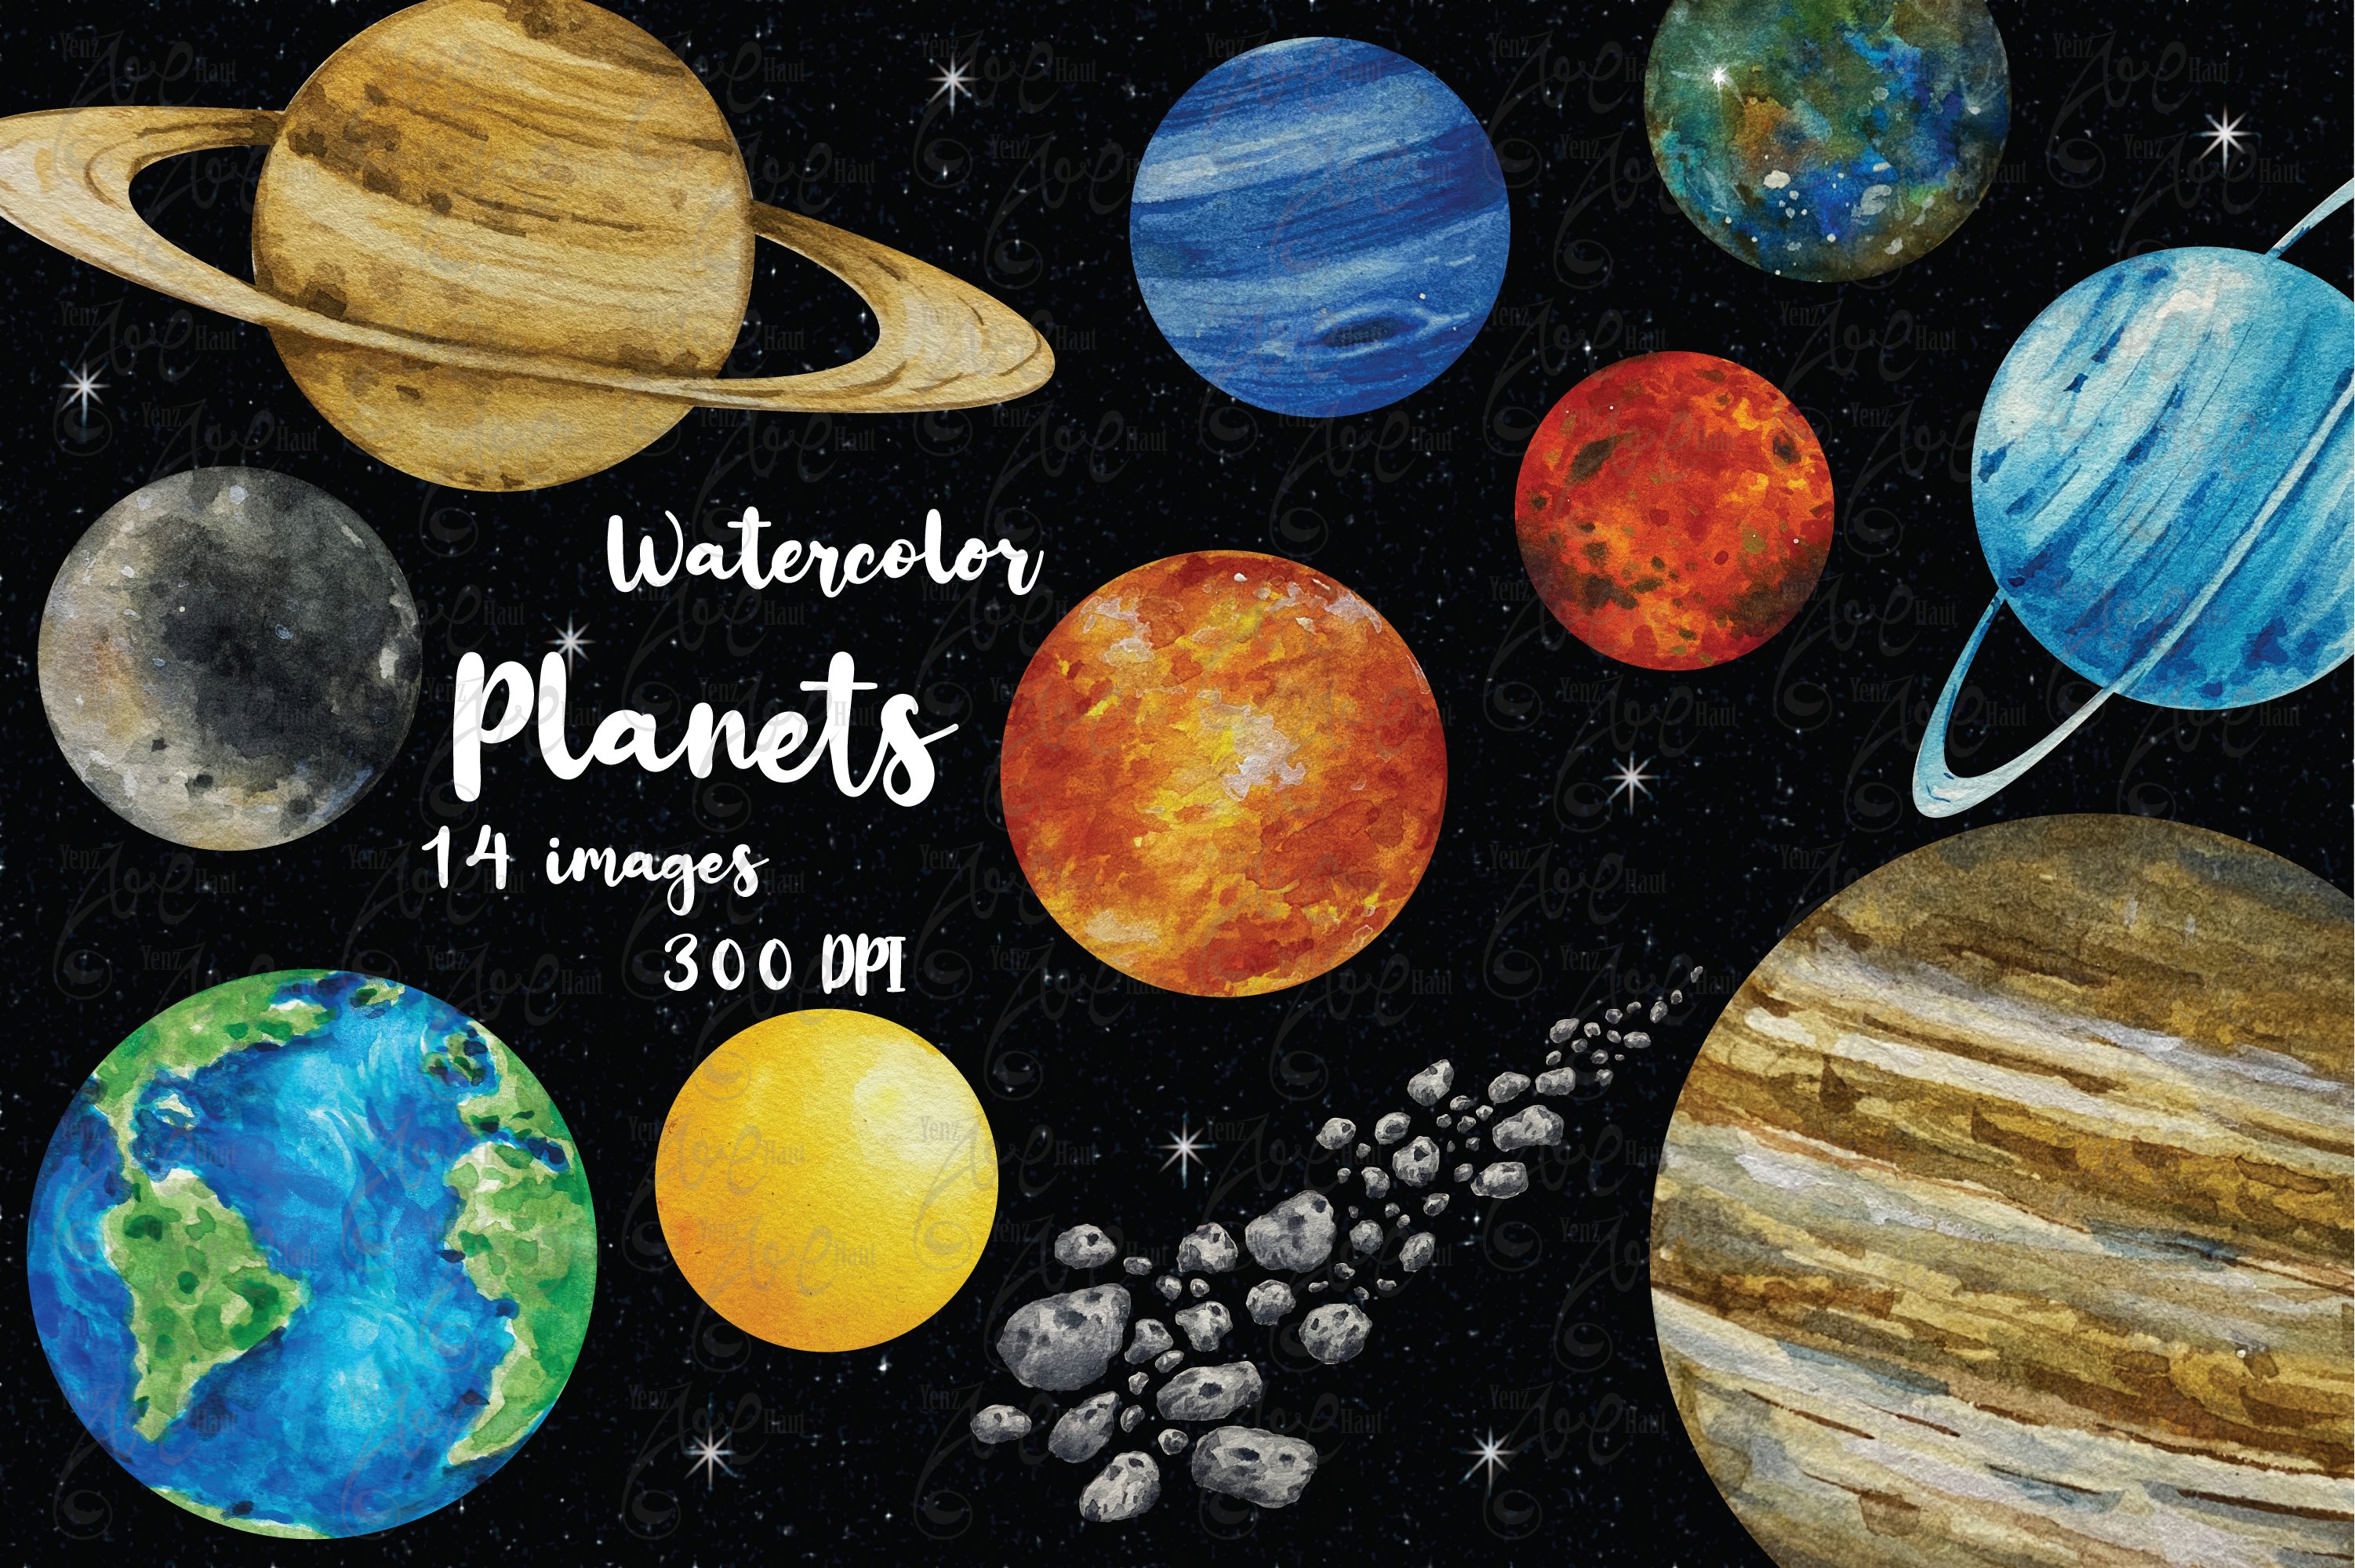 Watercolor Planet Solar System Set cover image.